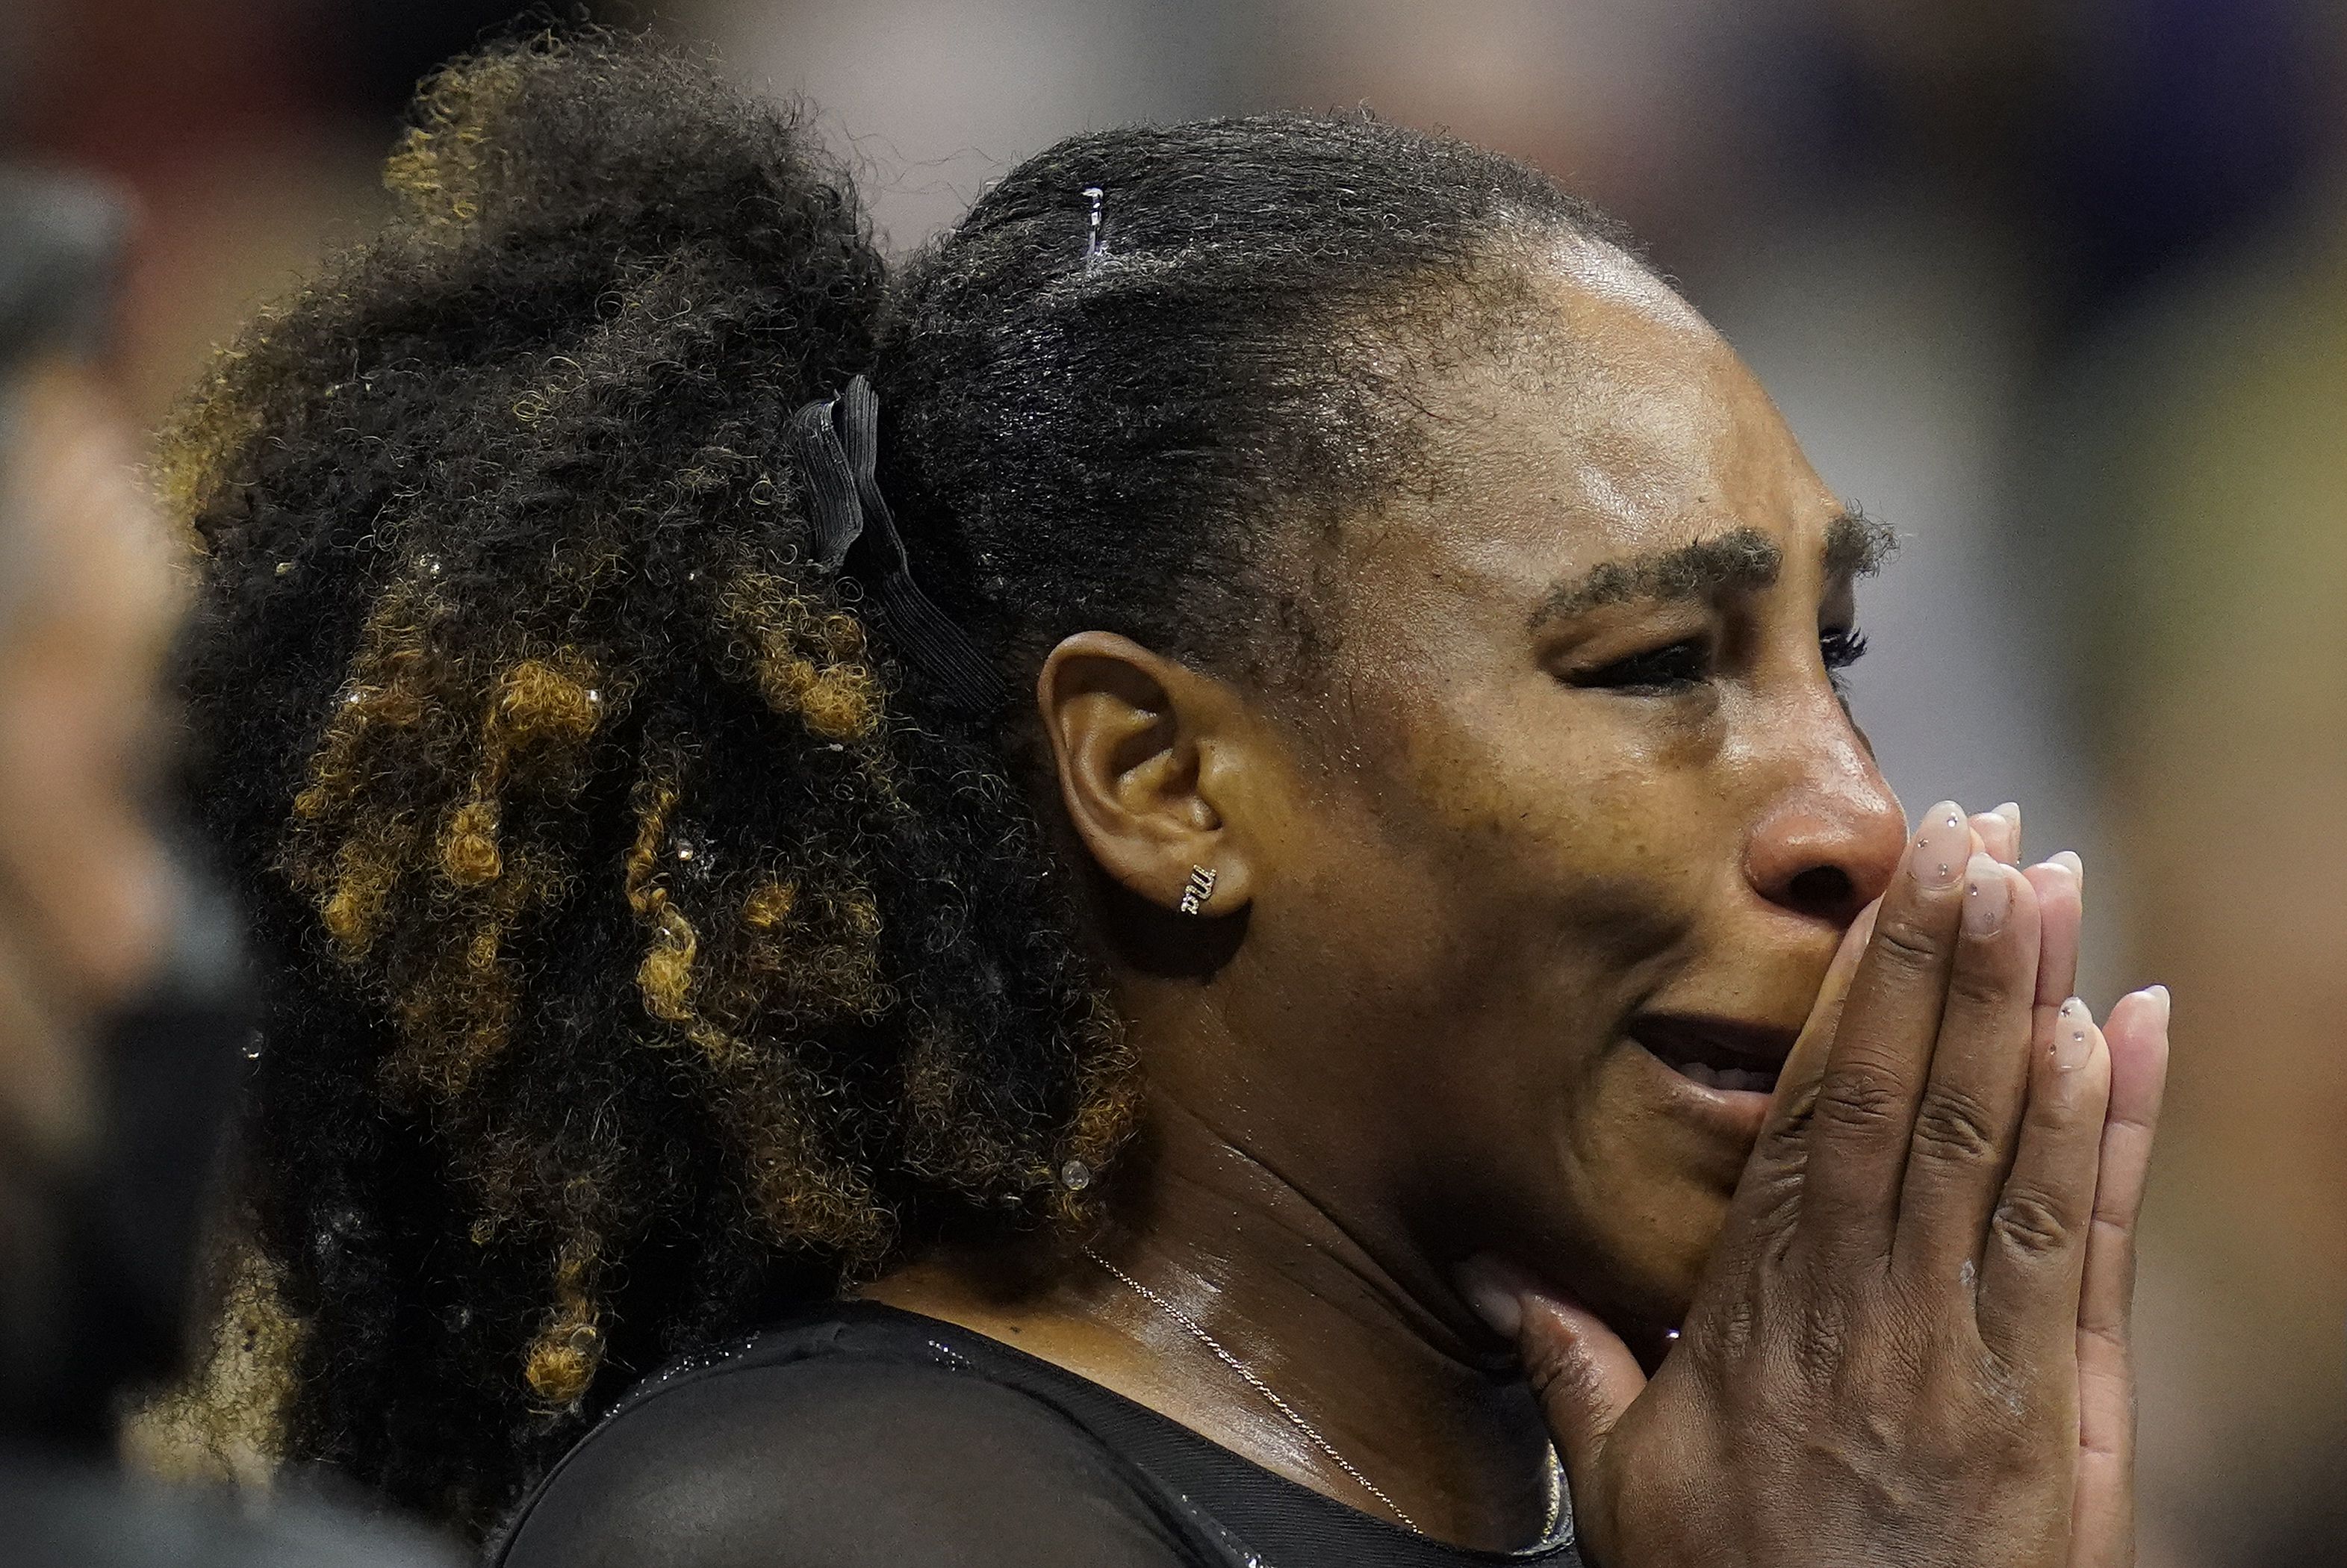 Serena Williams reacts after losing to Aussie Ajla Tomljanovic  in the third round of the U.S. Open tennis championships, Friday, Sept. 2, 2022, in New York. (AP Photo/Charles Krupa)